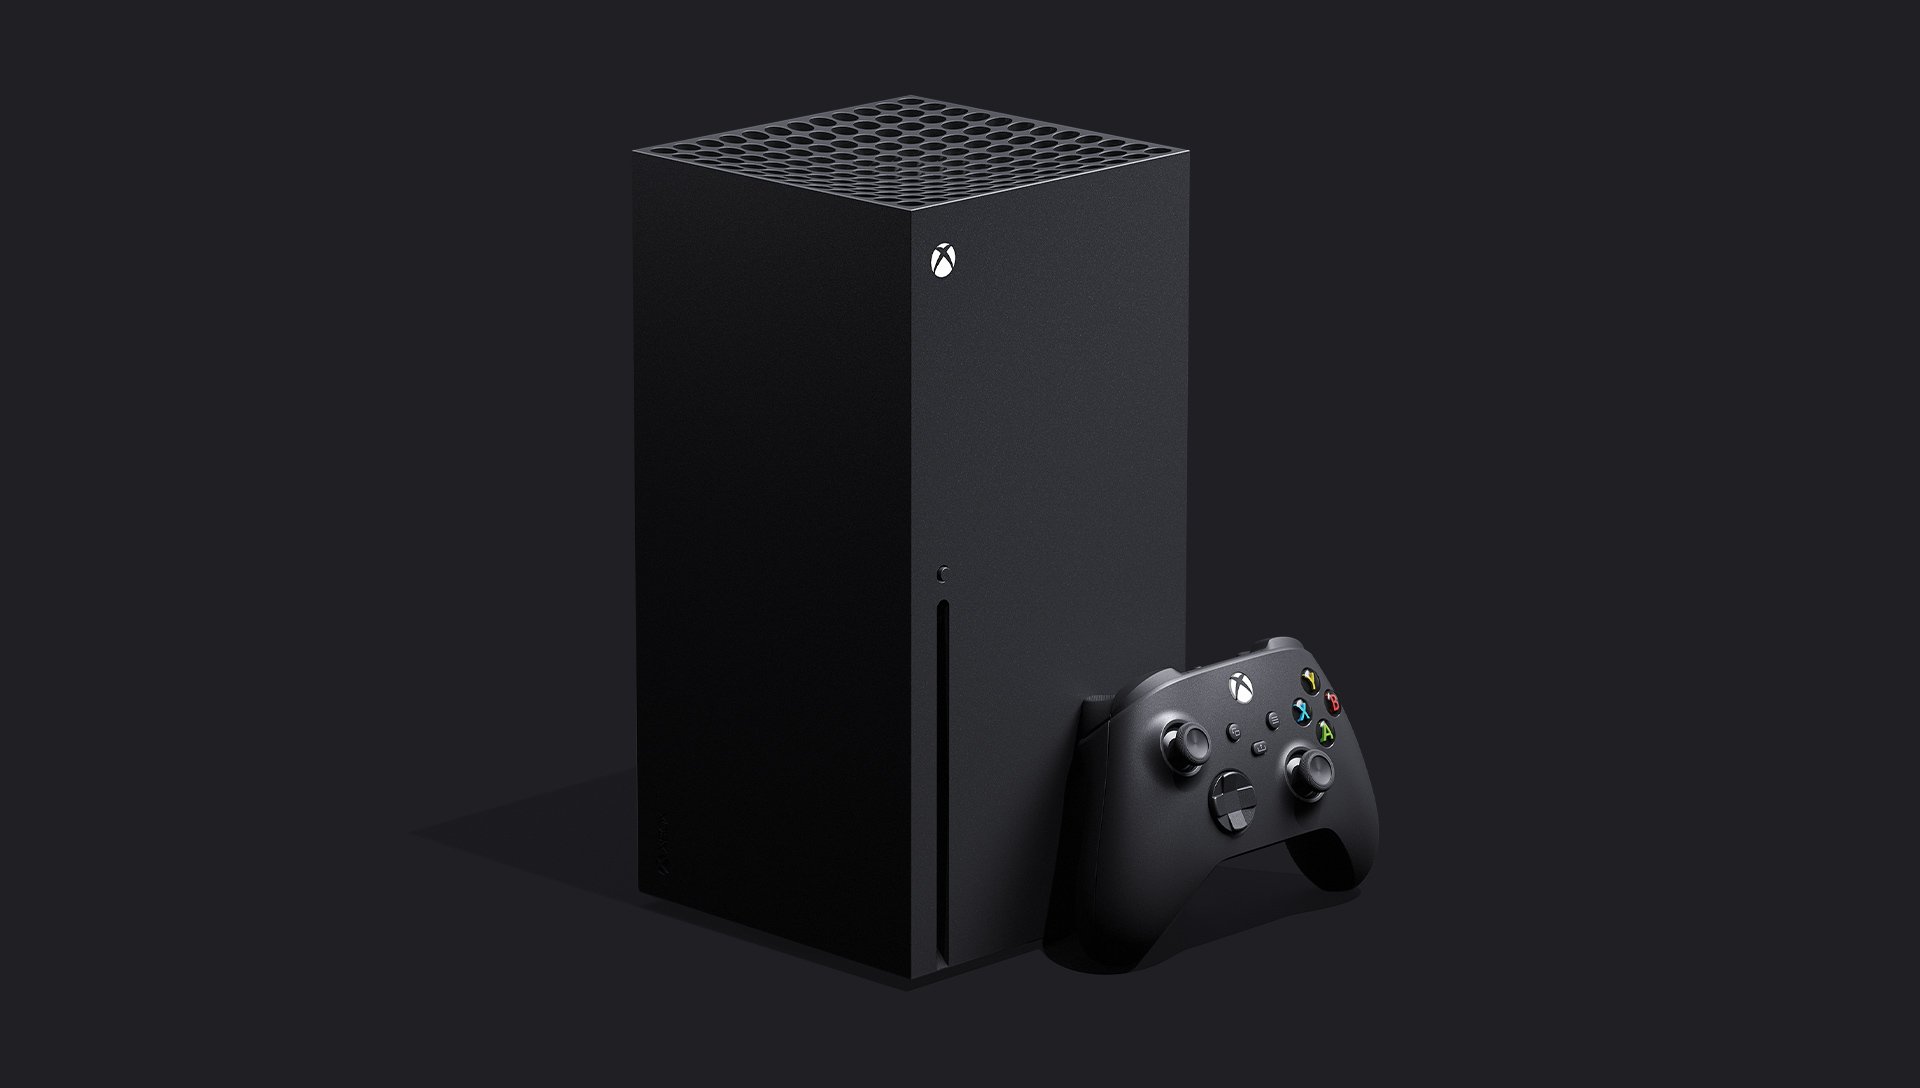 Xbox Series X Price and Release Date Leaks